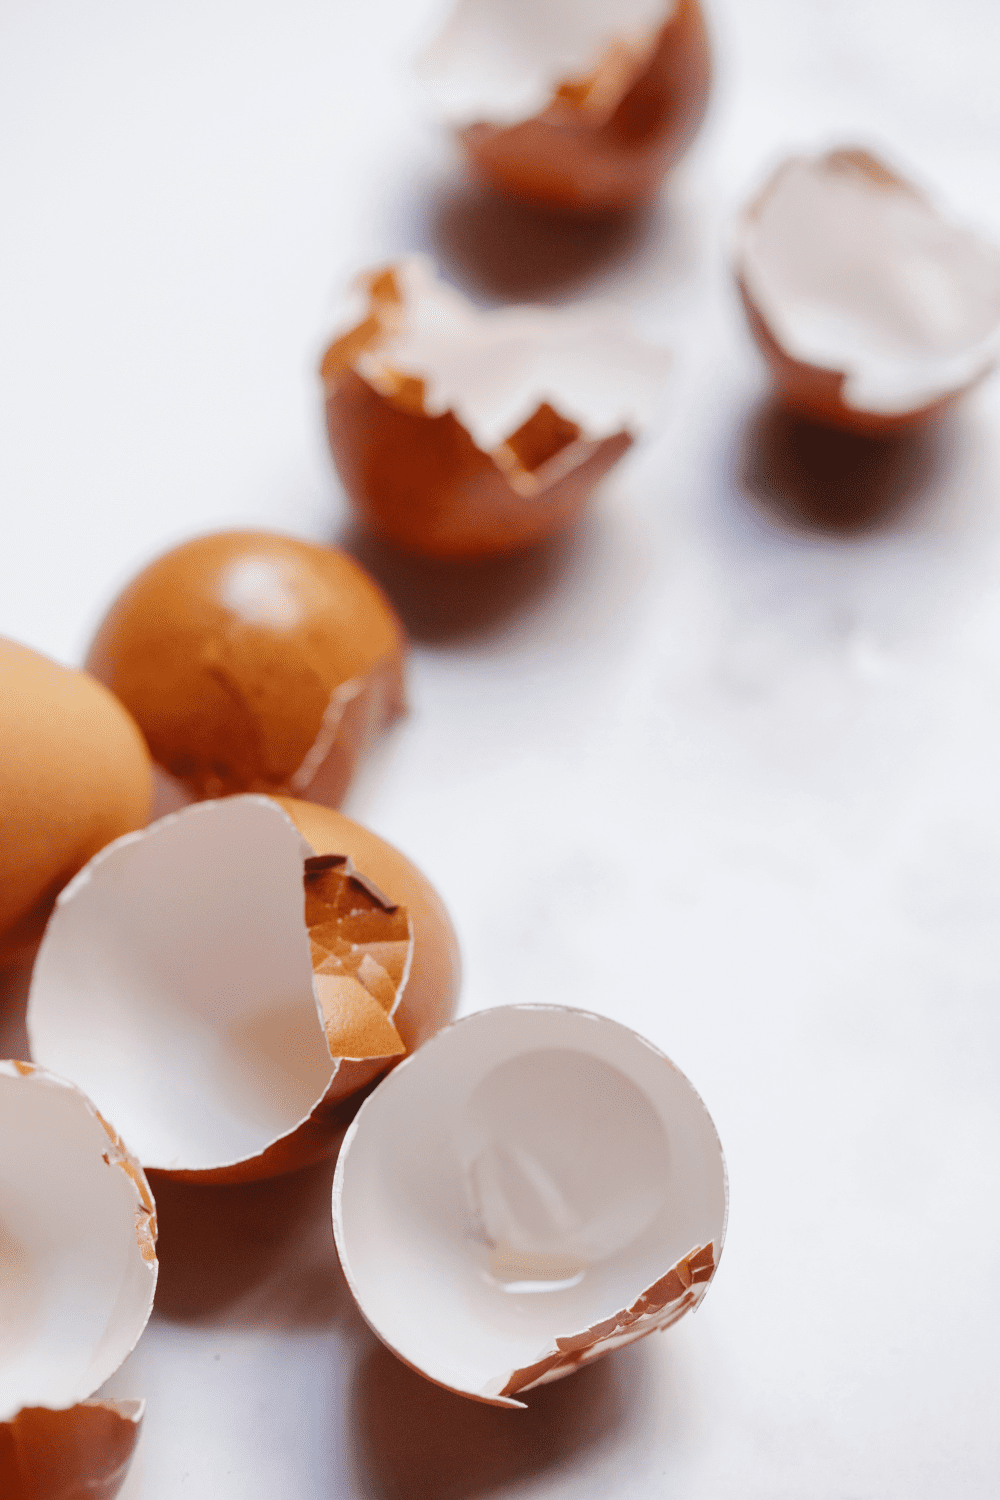 a picture of cracked egg shells since eggs can be used on both the psmf diet and carnivore diet.
